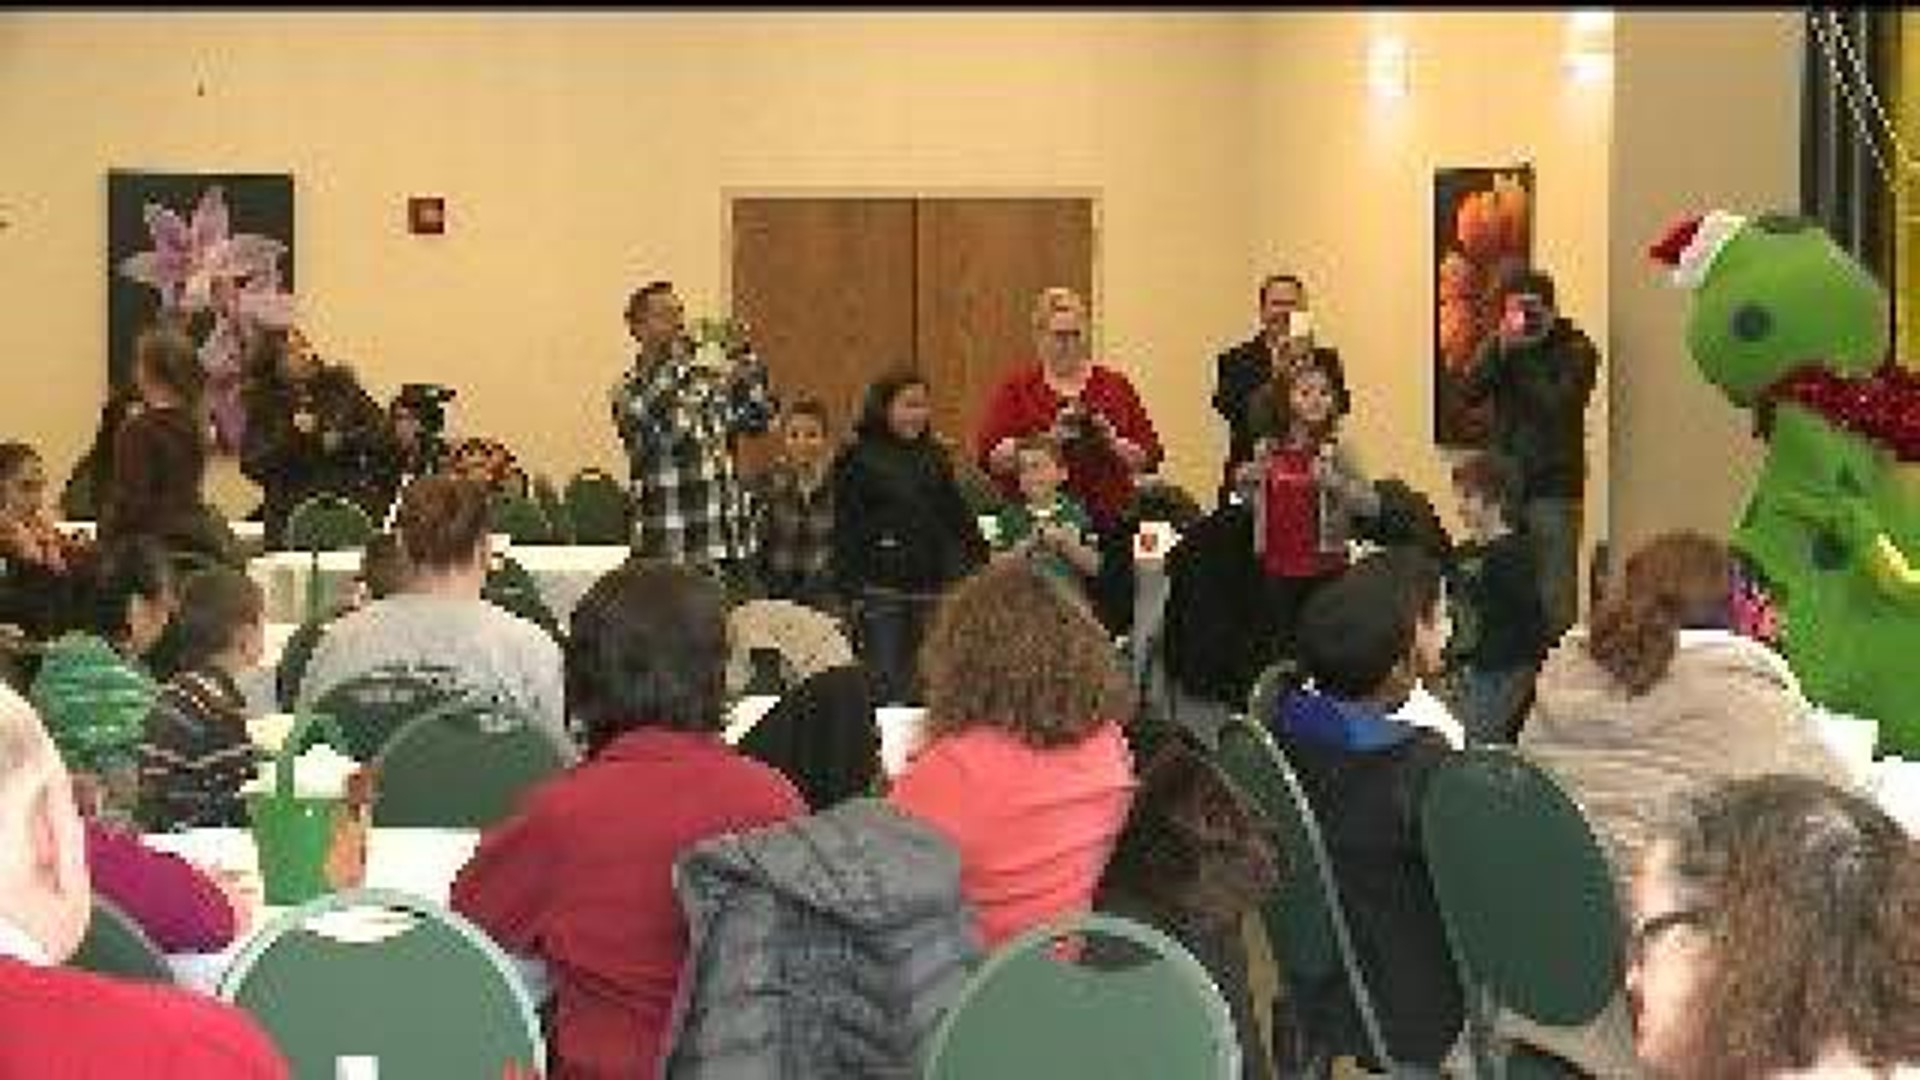 Holiday celebration combines American and Mexican cultures